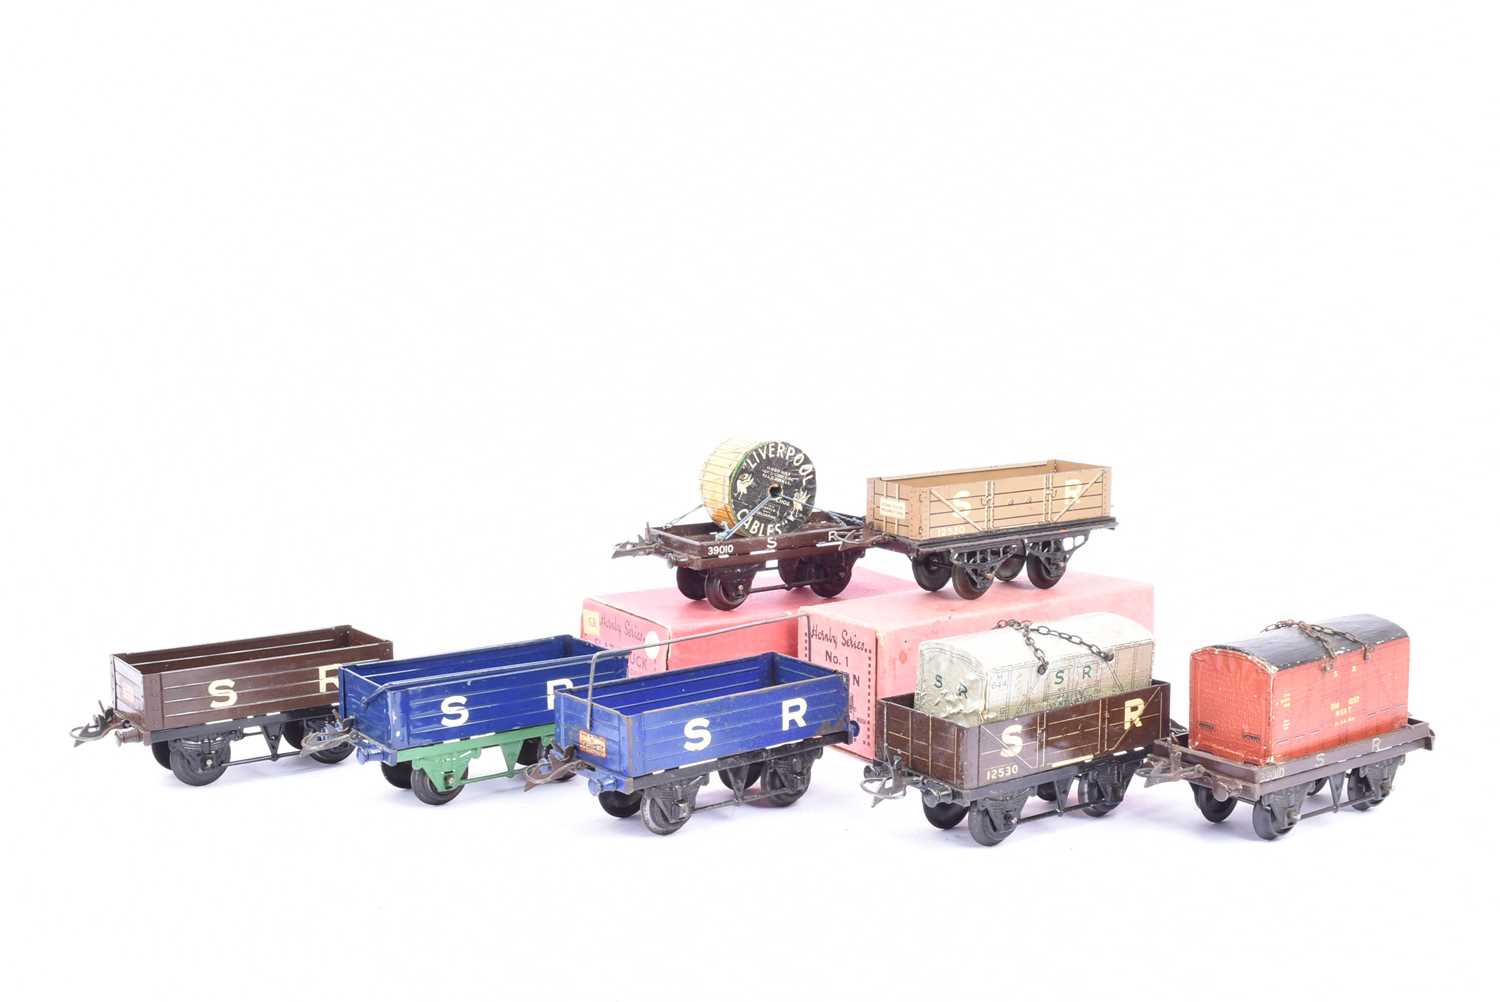 Lot 121 - Hornby 0 Gauge SR Open wagons and Flat Trucks with Loads